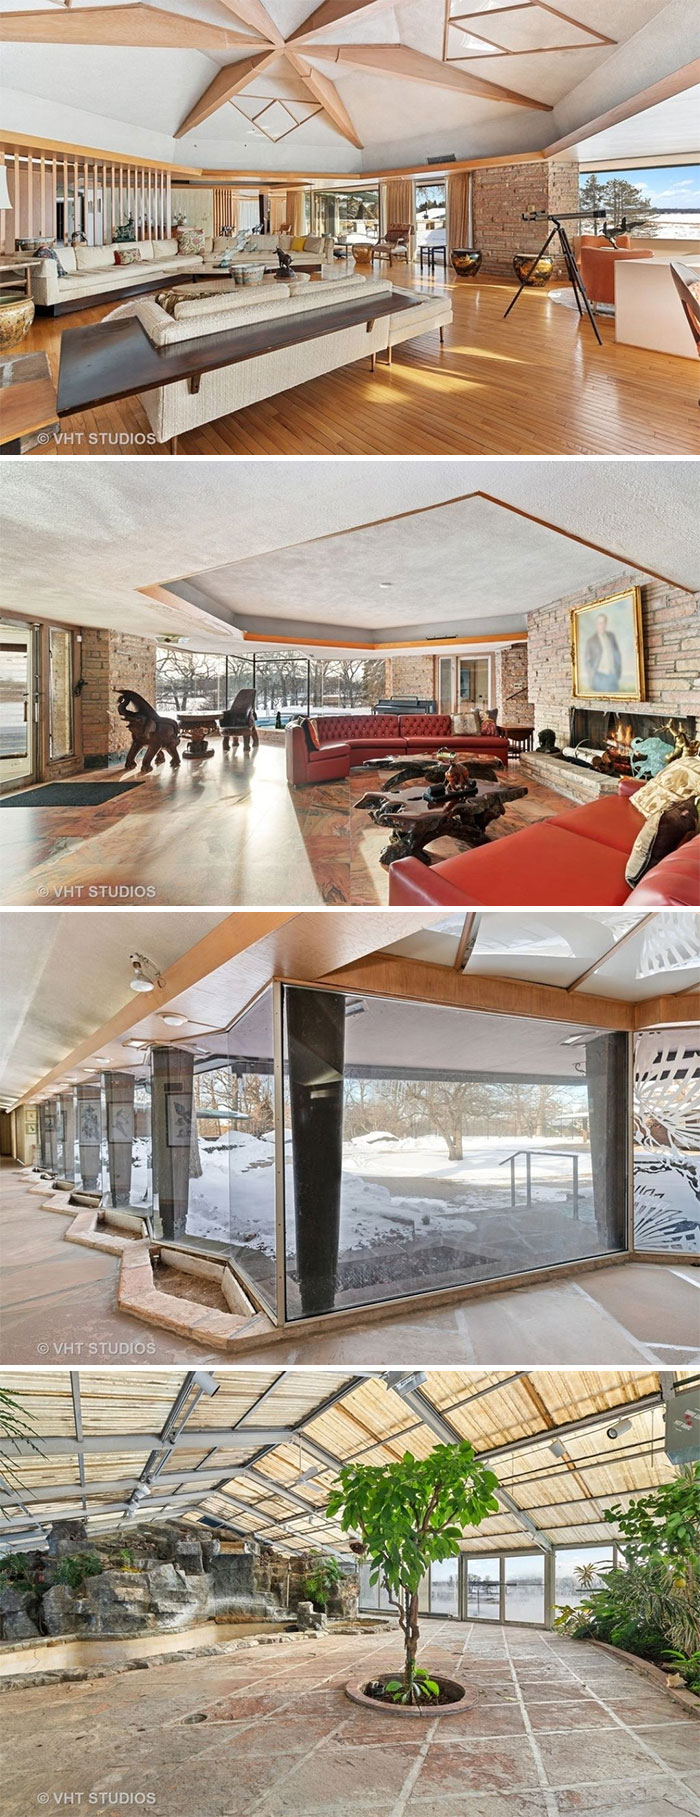 This Mid-Century Time Capsule, Designed By Frank Lloyd Wright's Son, Is Very Heavily Bleeding Into The "Unironically Amazing" Category